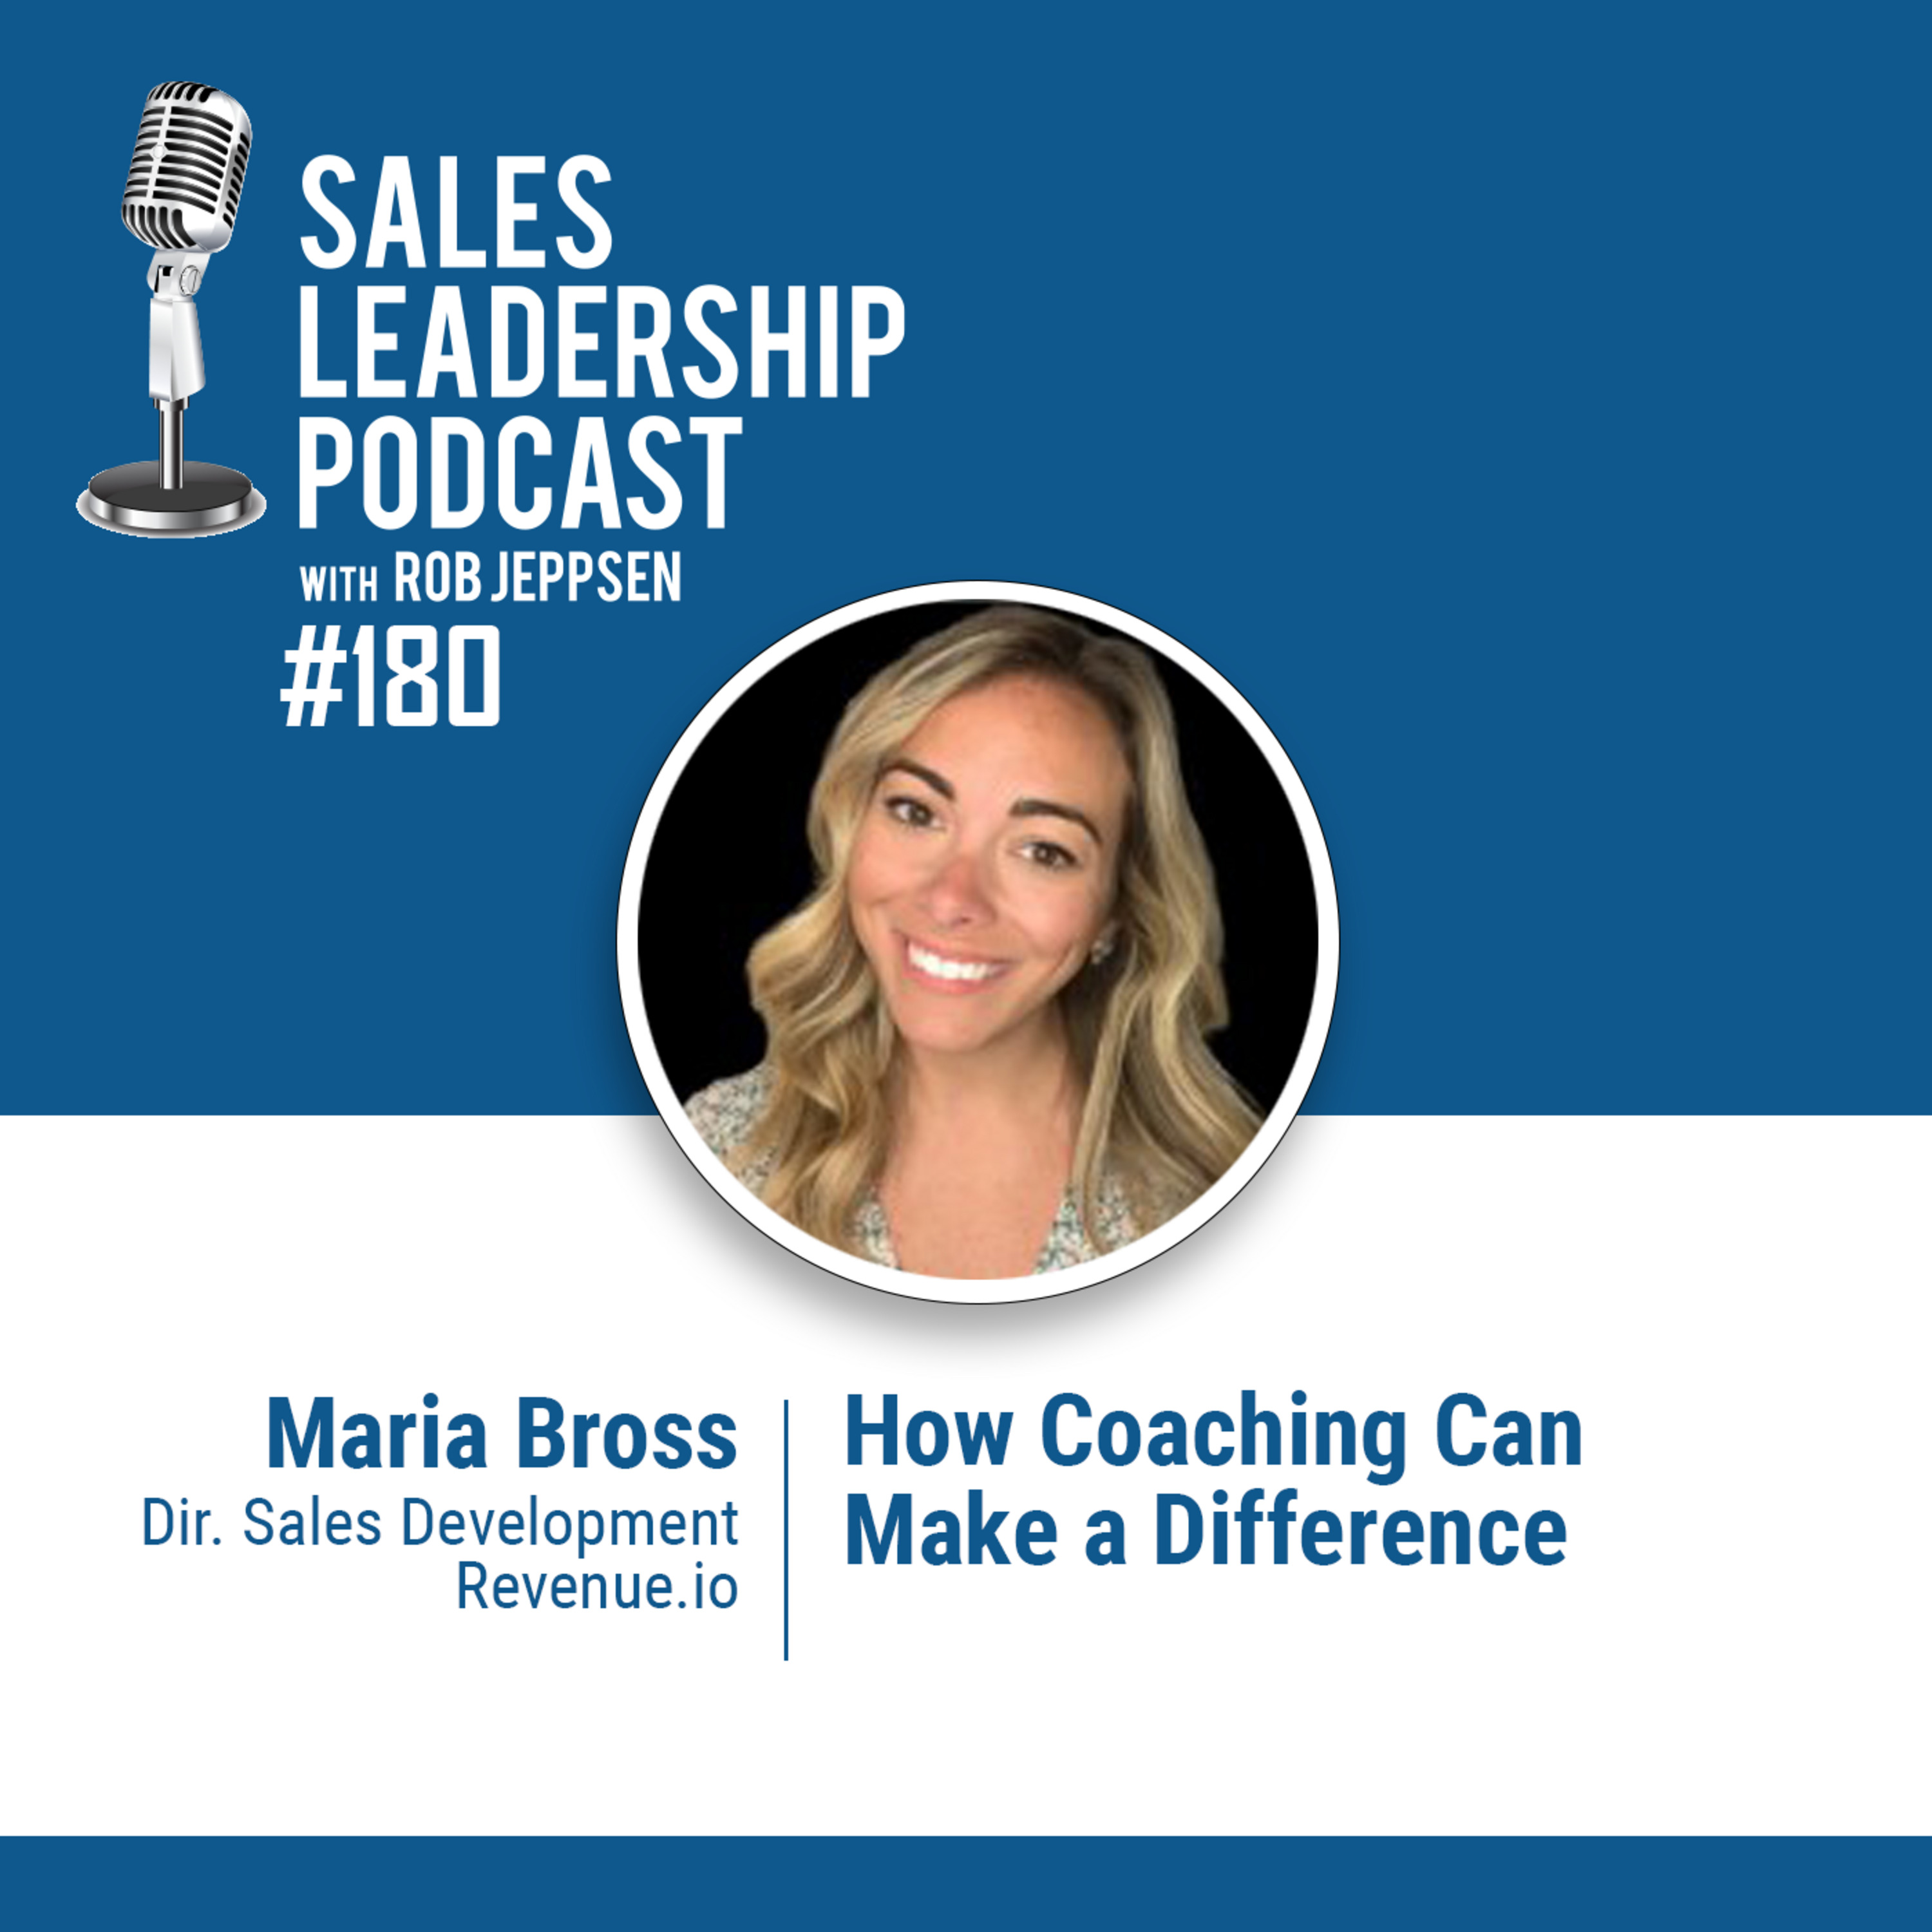 Episode 181: #180: Maria Bross of Revenue.io — How Coaching Can Make a Difference